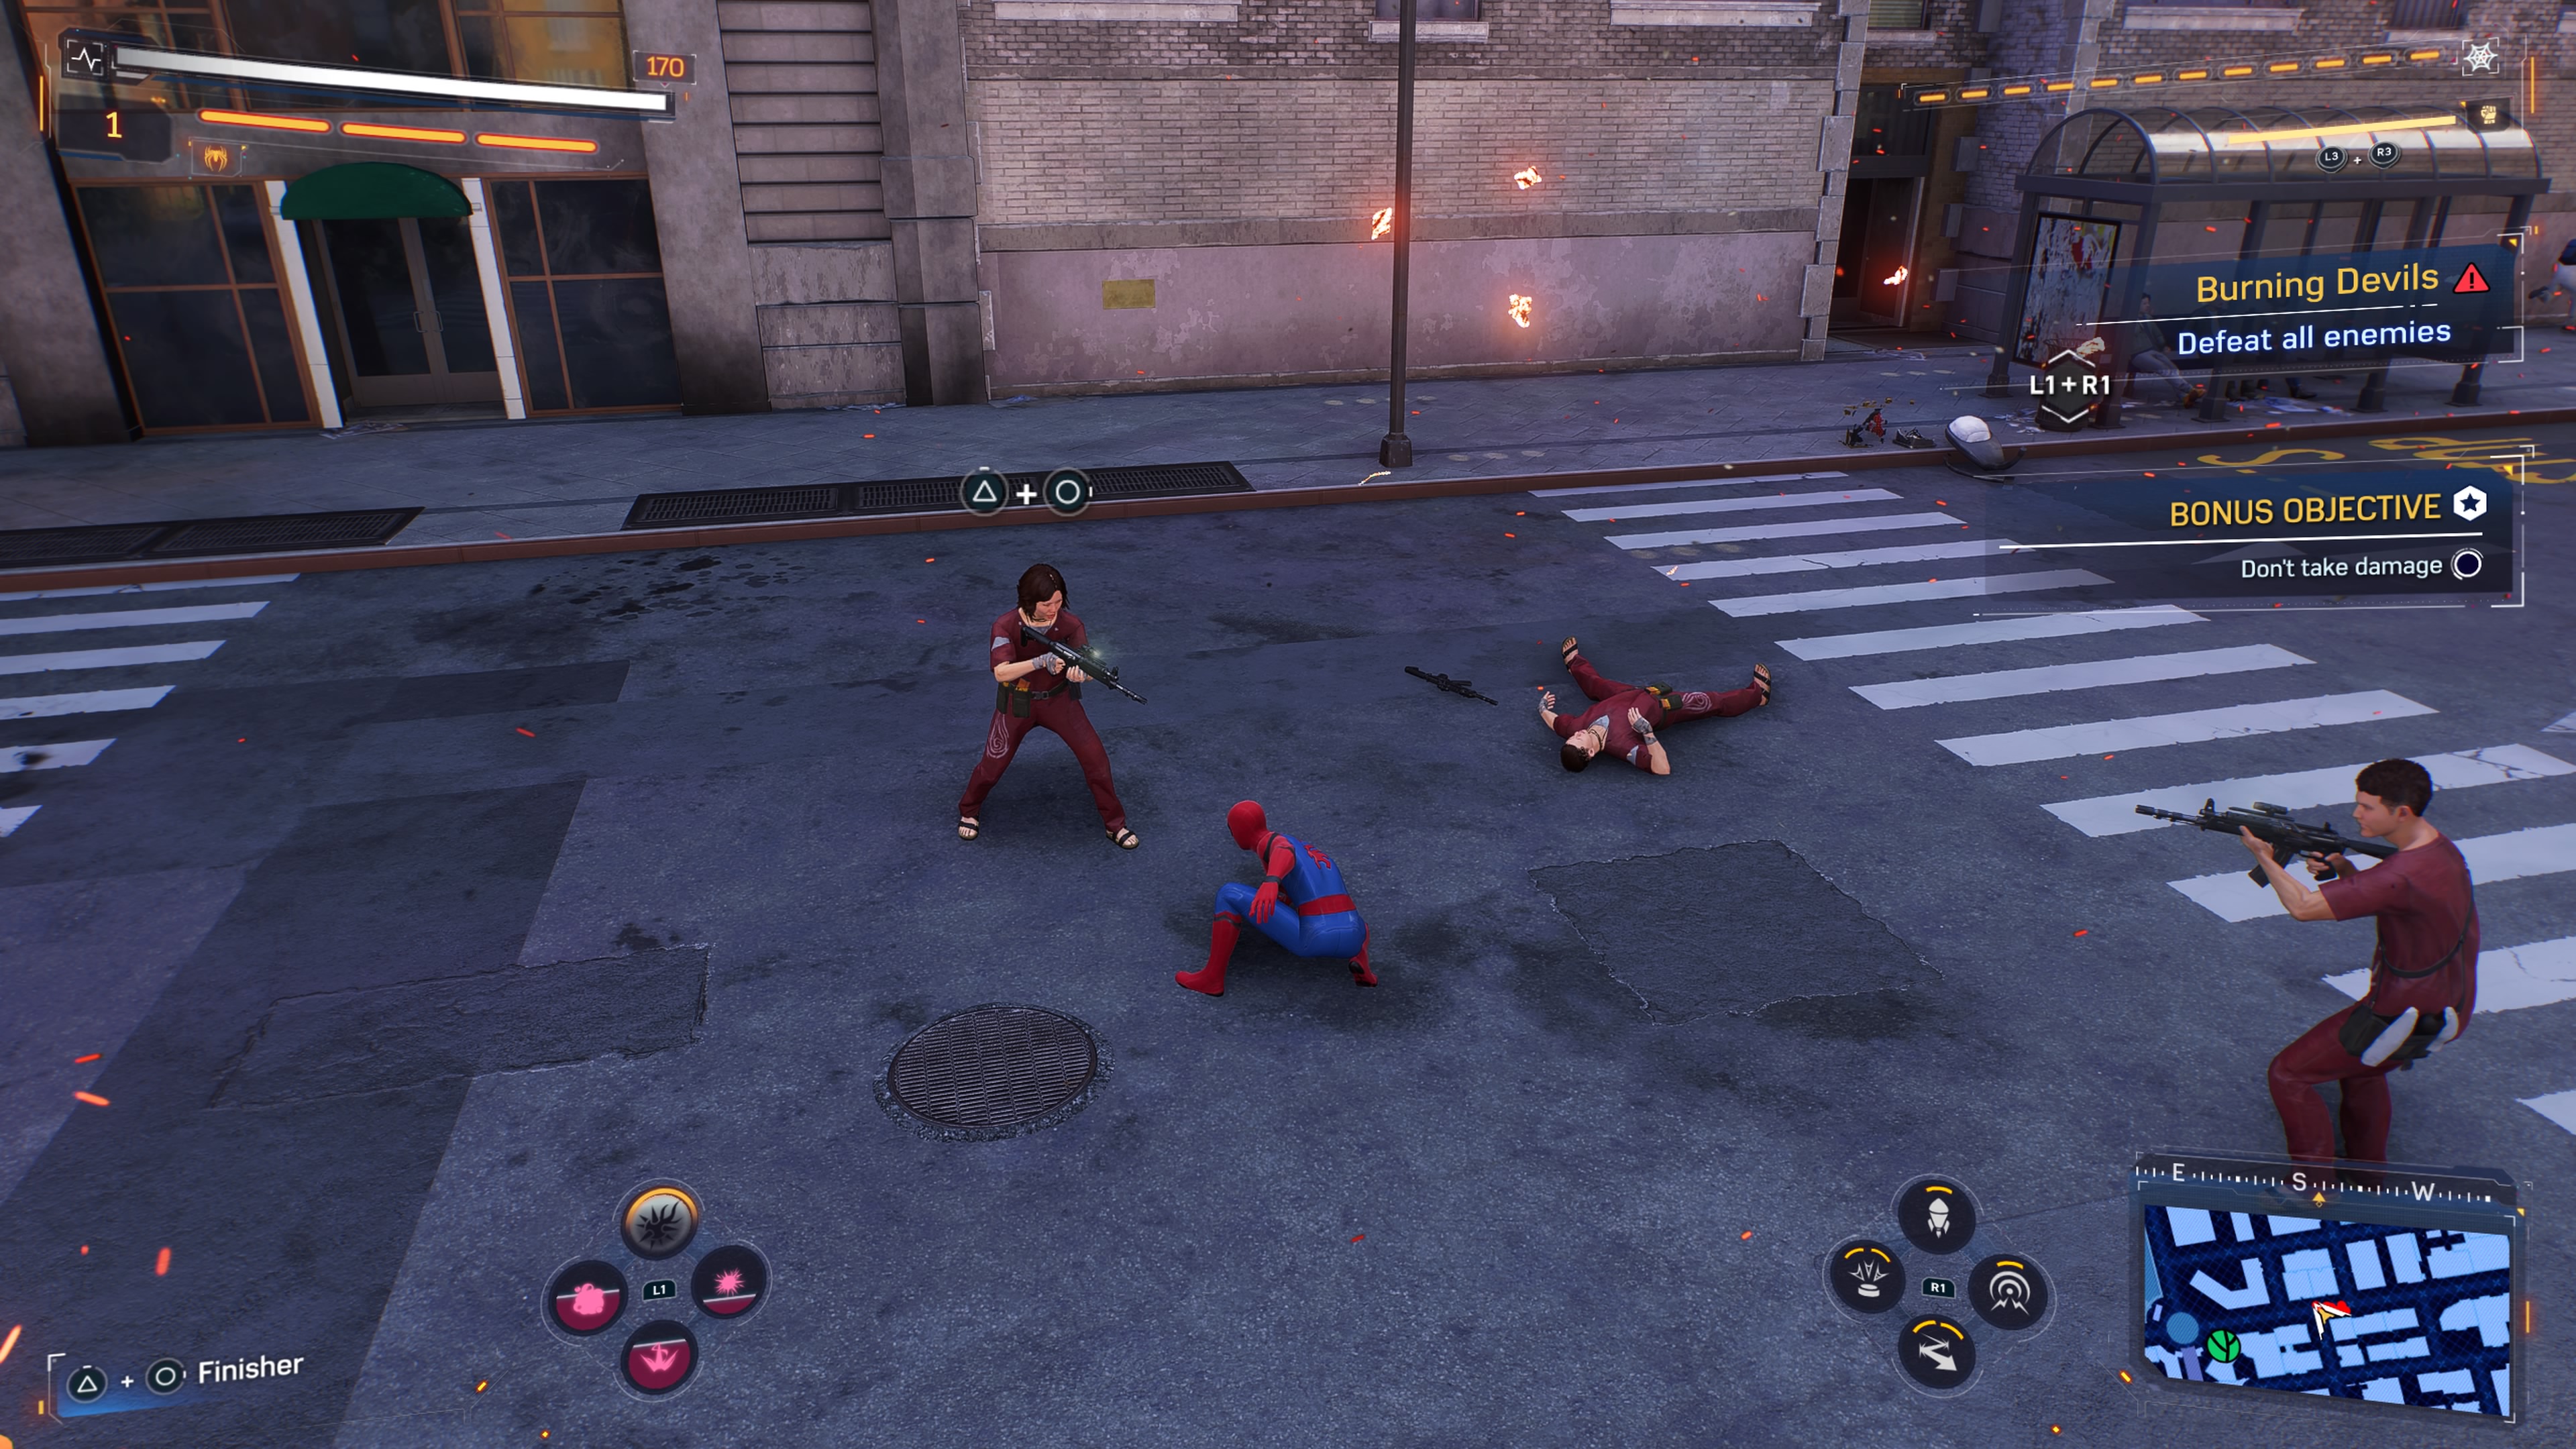 Spider-Man fights Followers of the Flame on a New York street in Spider-Man 2.